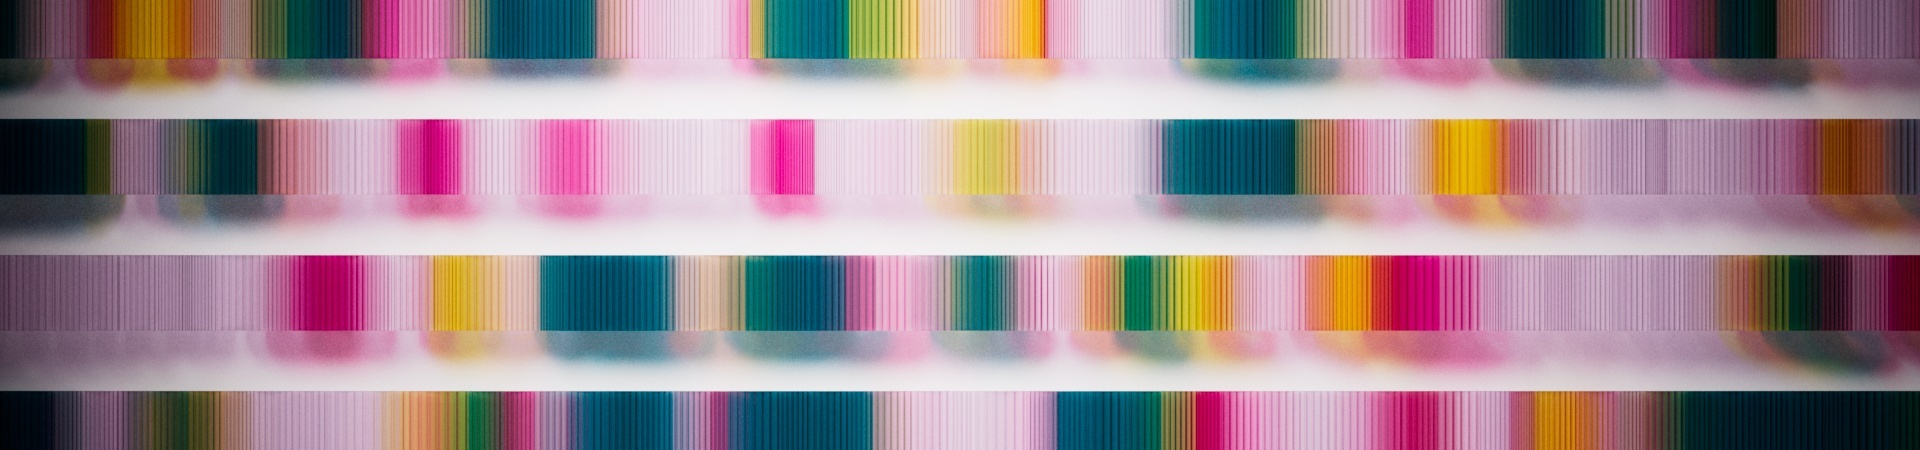 Horizontal rows of vertical bands of translucent color, ranging from pinks to yellows to white and green